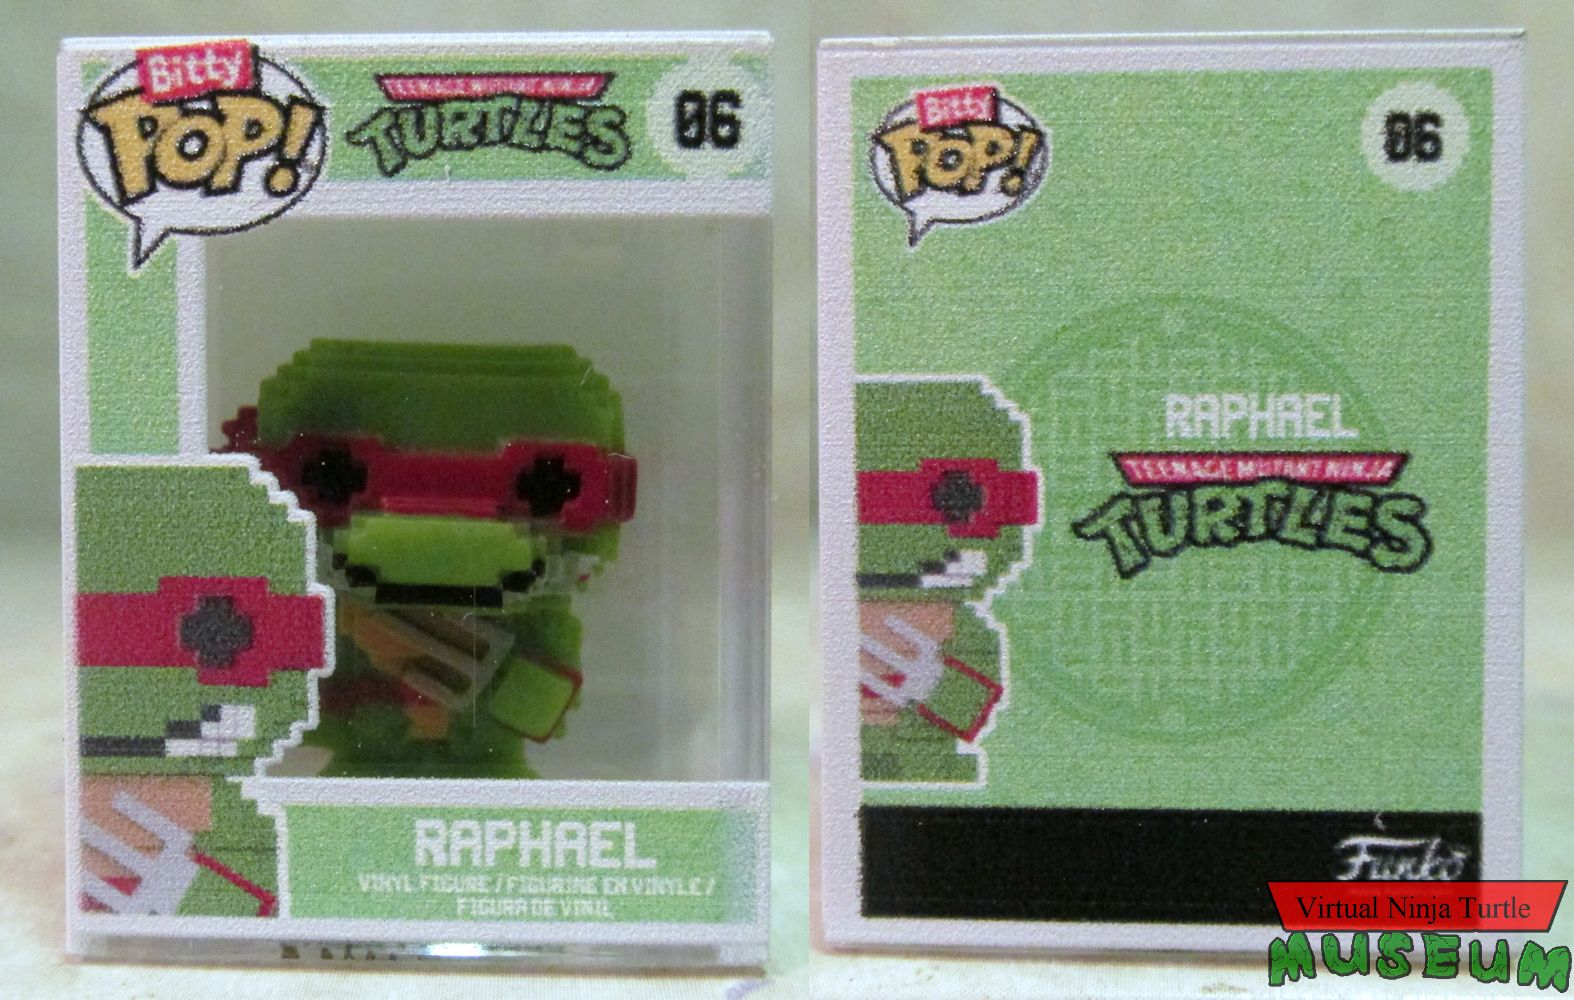 8Bit Raphael in case front and back